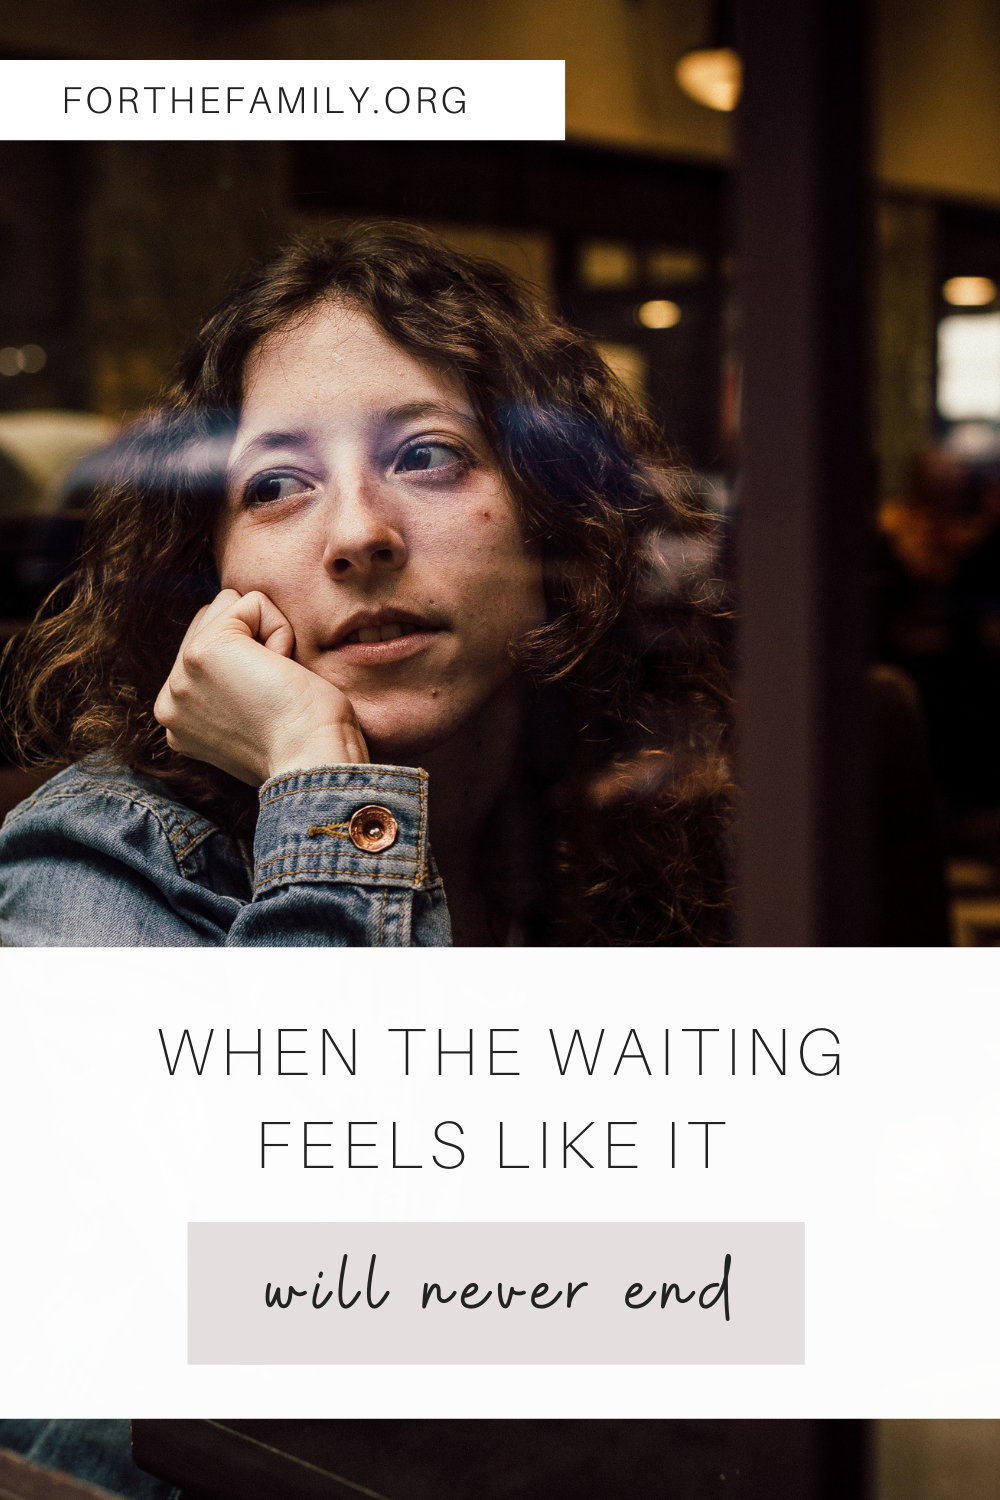 In seasons of waiting, it sometimes feels like it will never end. But we can be so consumed by not having answers now that we miss out on life's blessings right in front of our faces! Here's what to do in times of waiting.